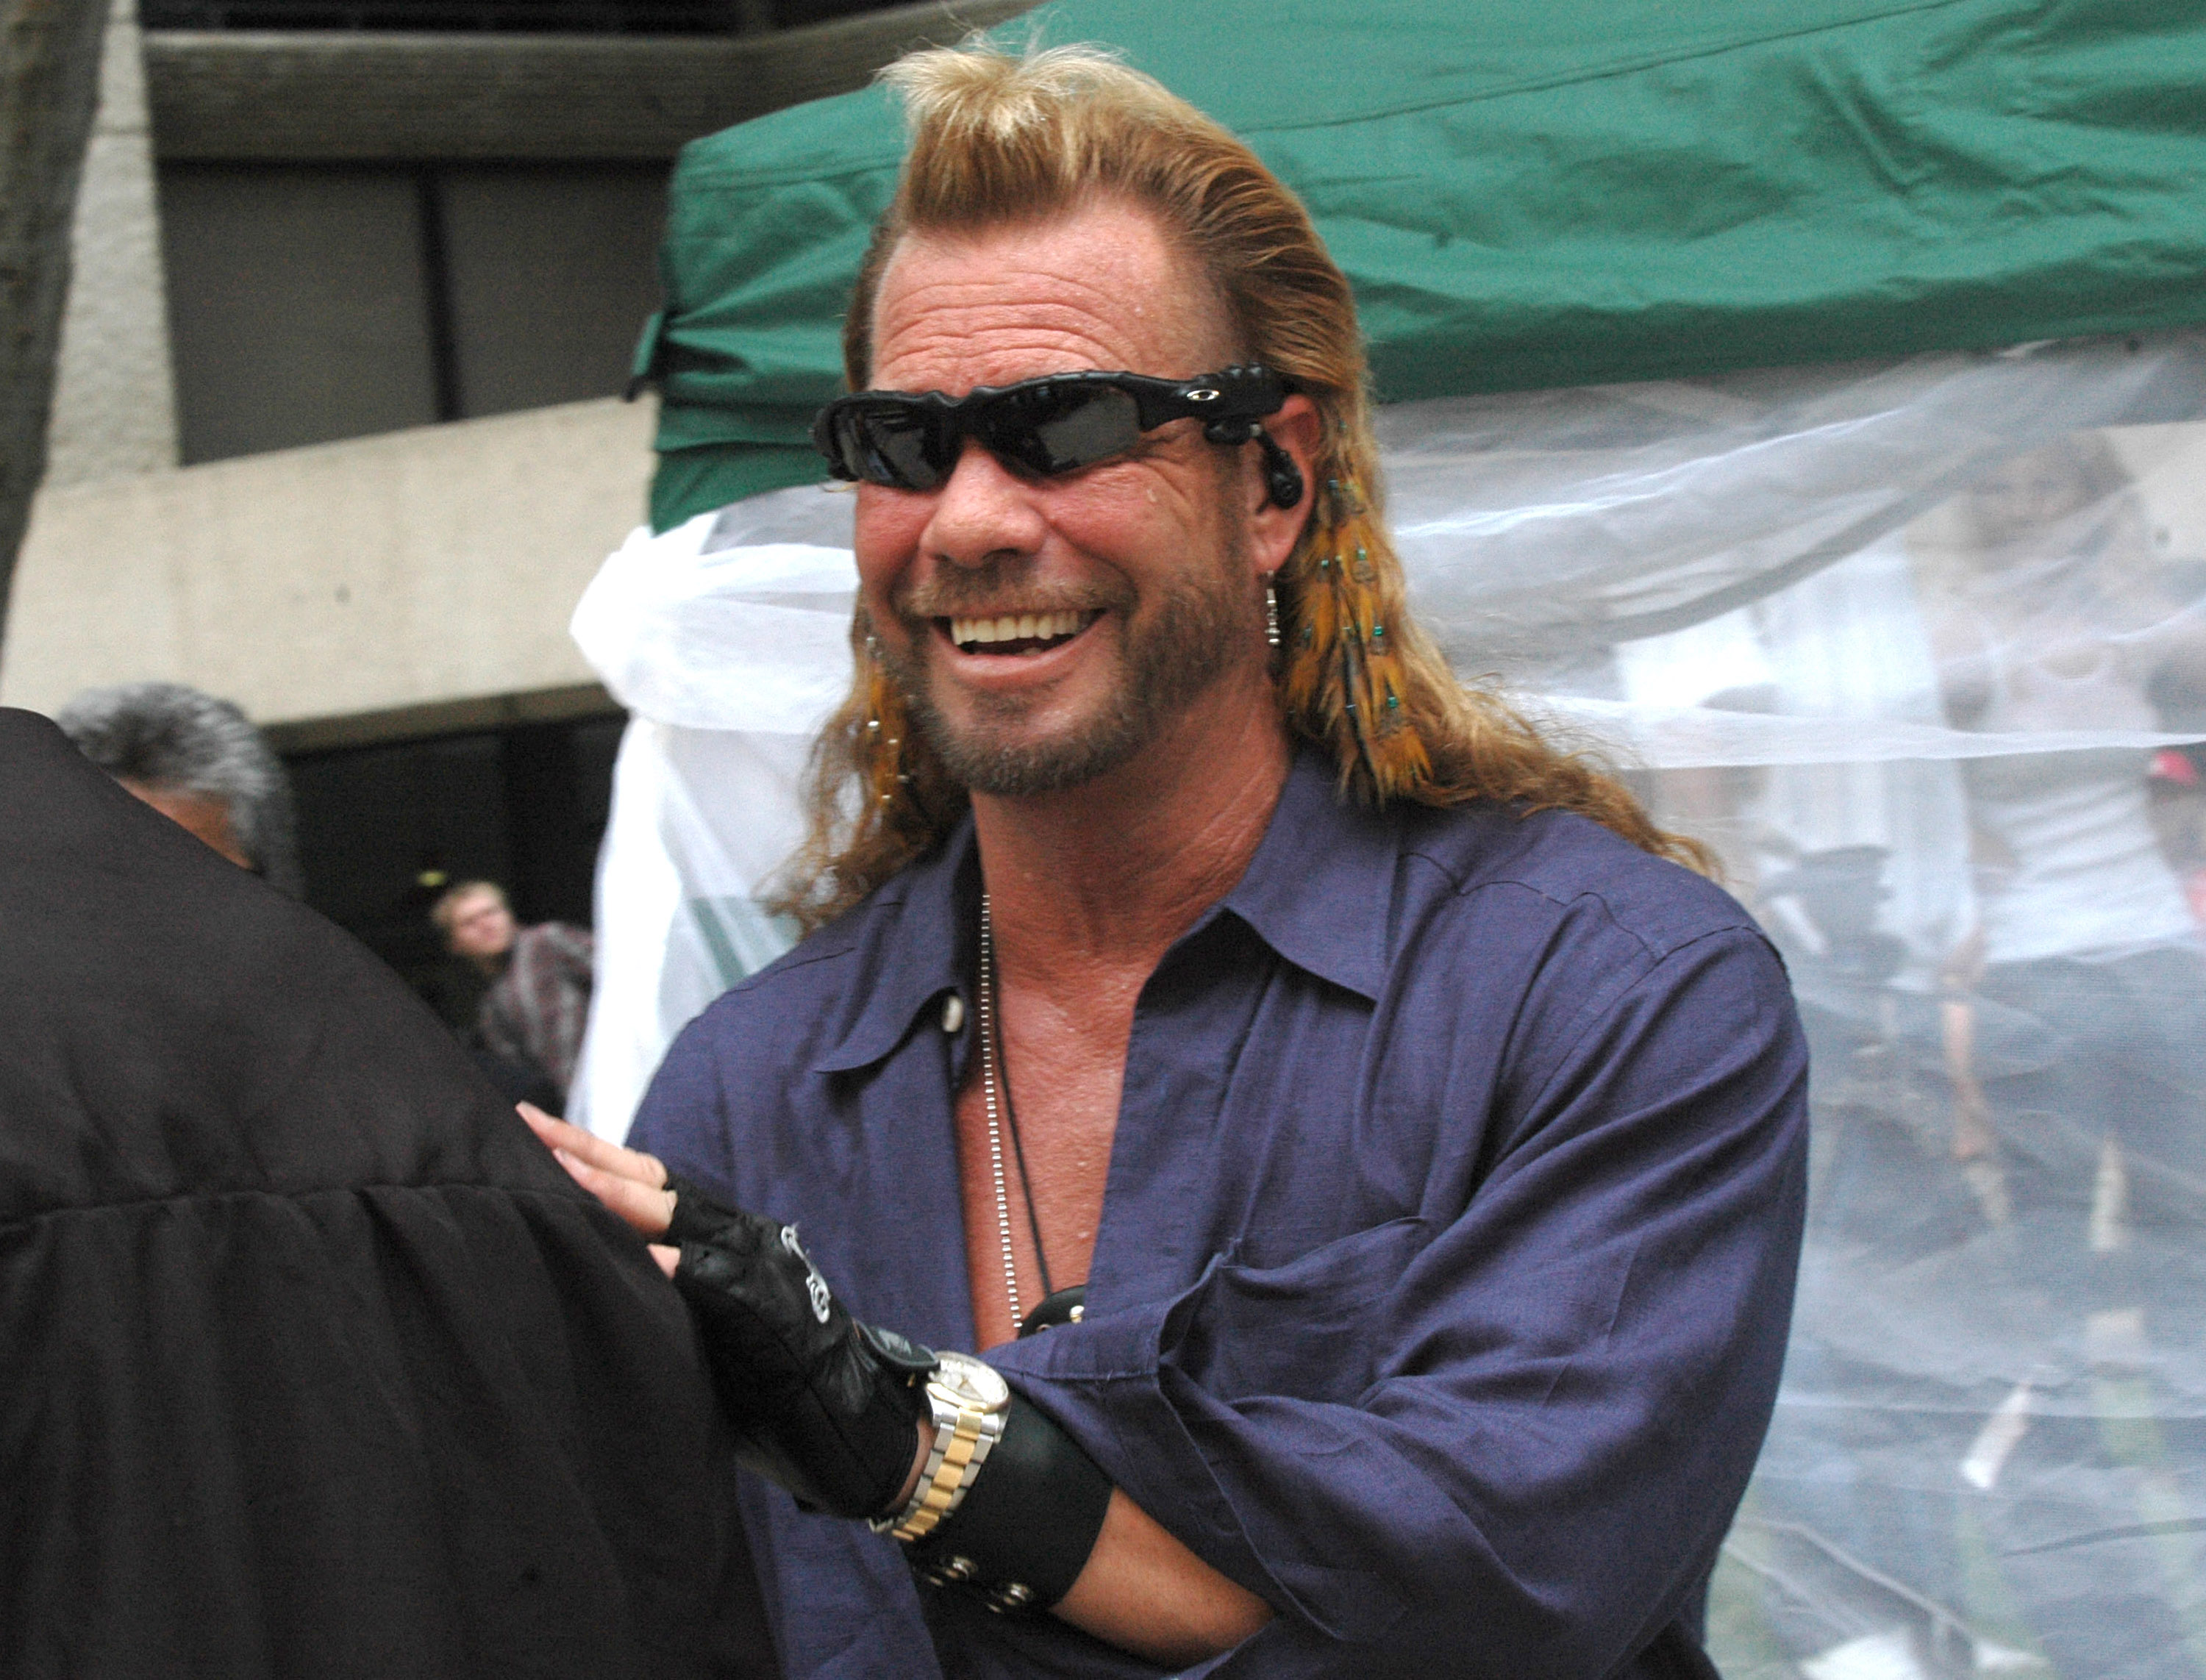 Duane Chapman participates in a fundraiser to benefit the March of Dimes on November 14, 2006, in Honolulu, Hawaii. | Source: Getty Images